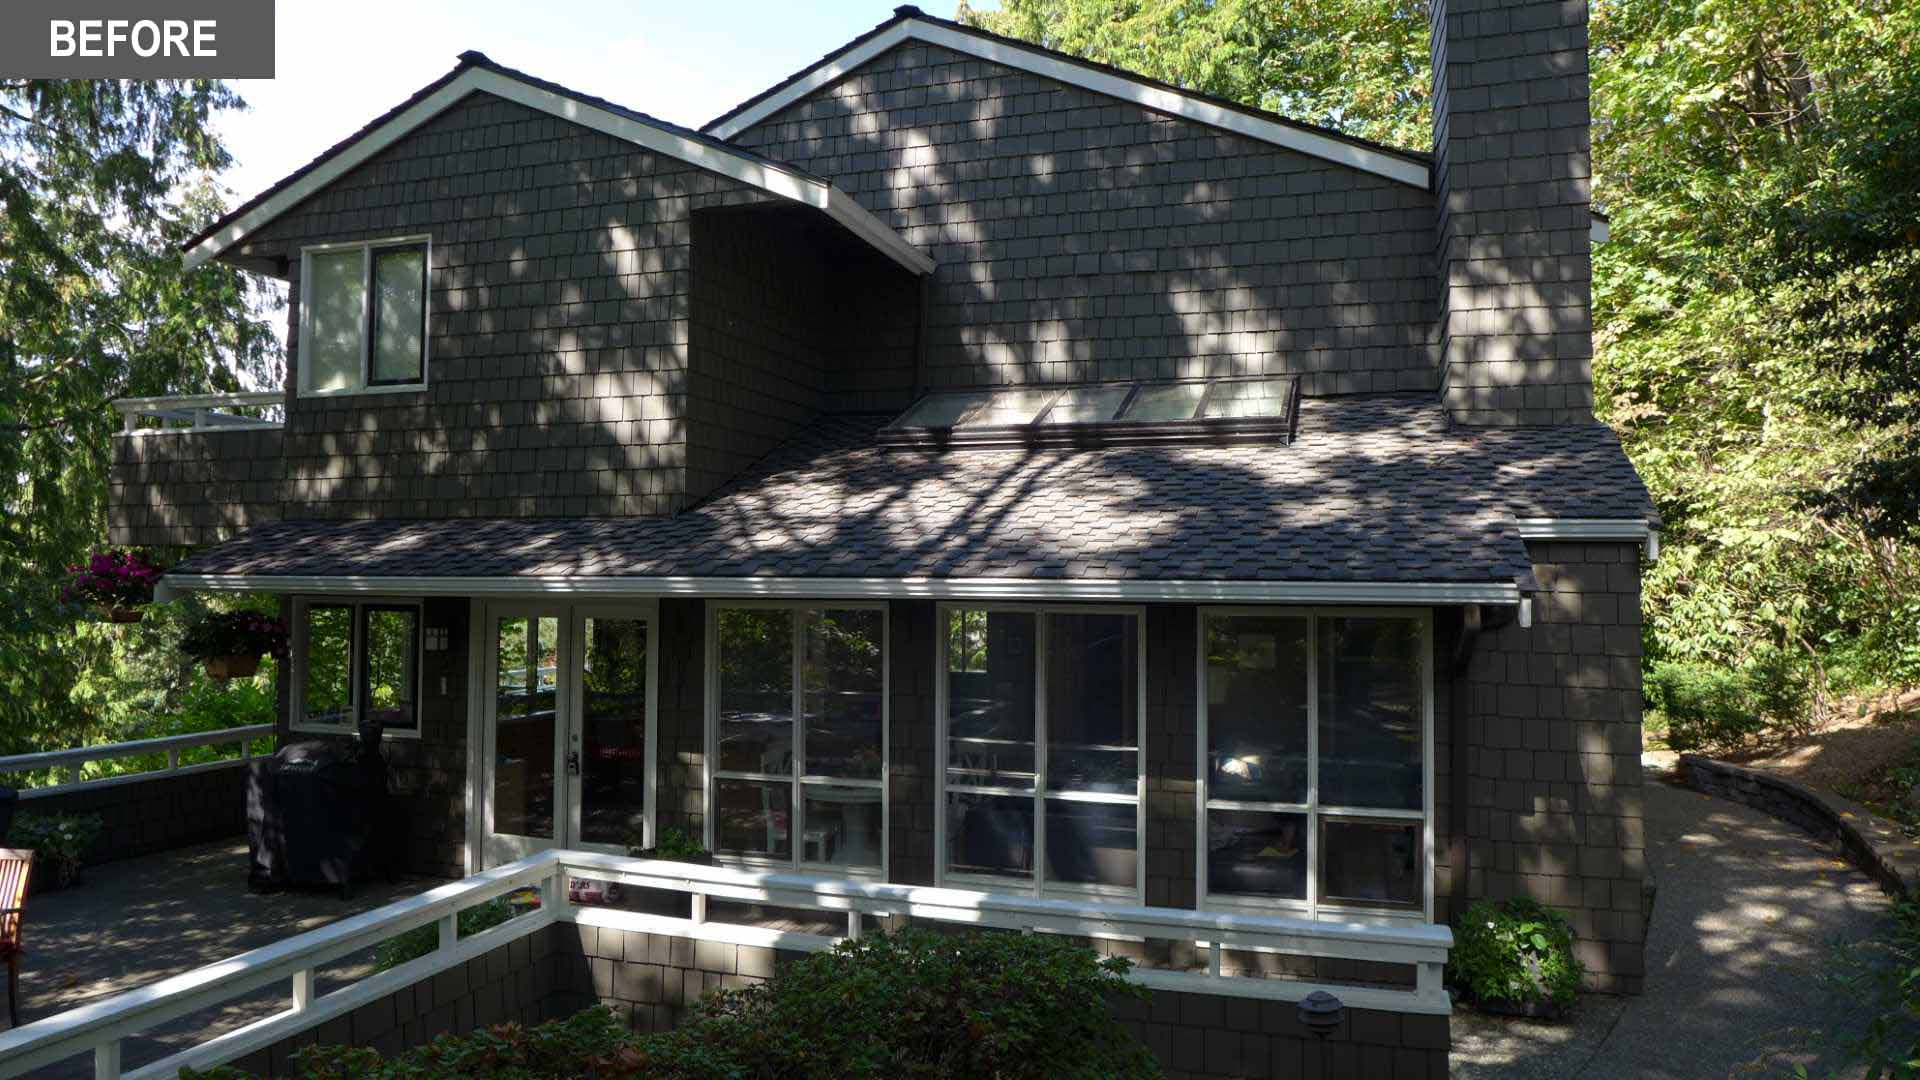 BEFORE - The contemporary remodel of a 1970s home included an updated exterior and interior.